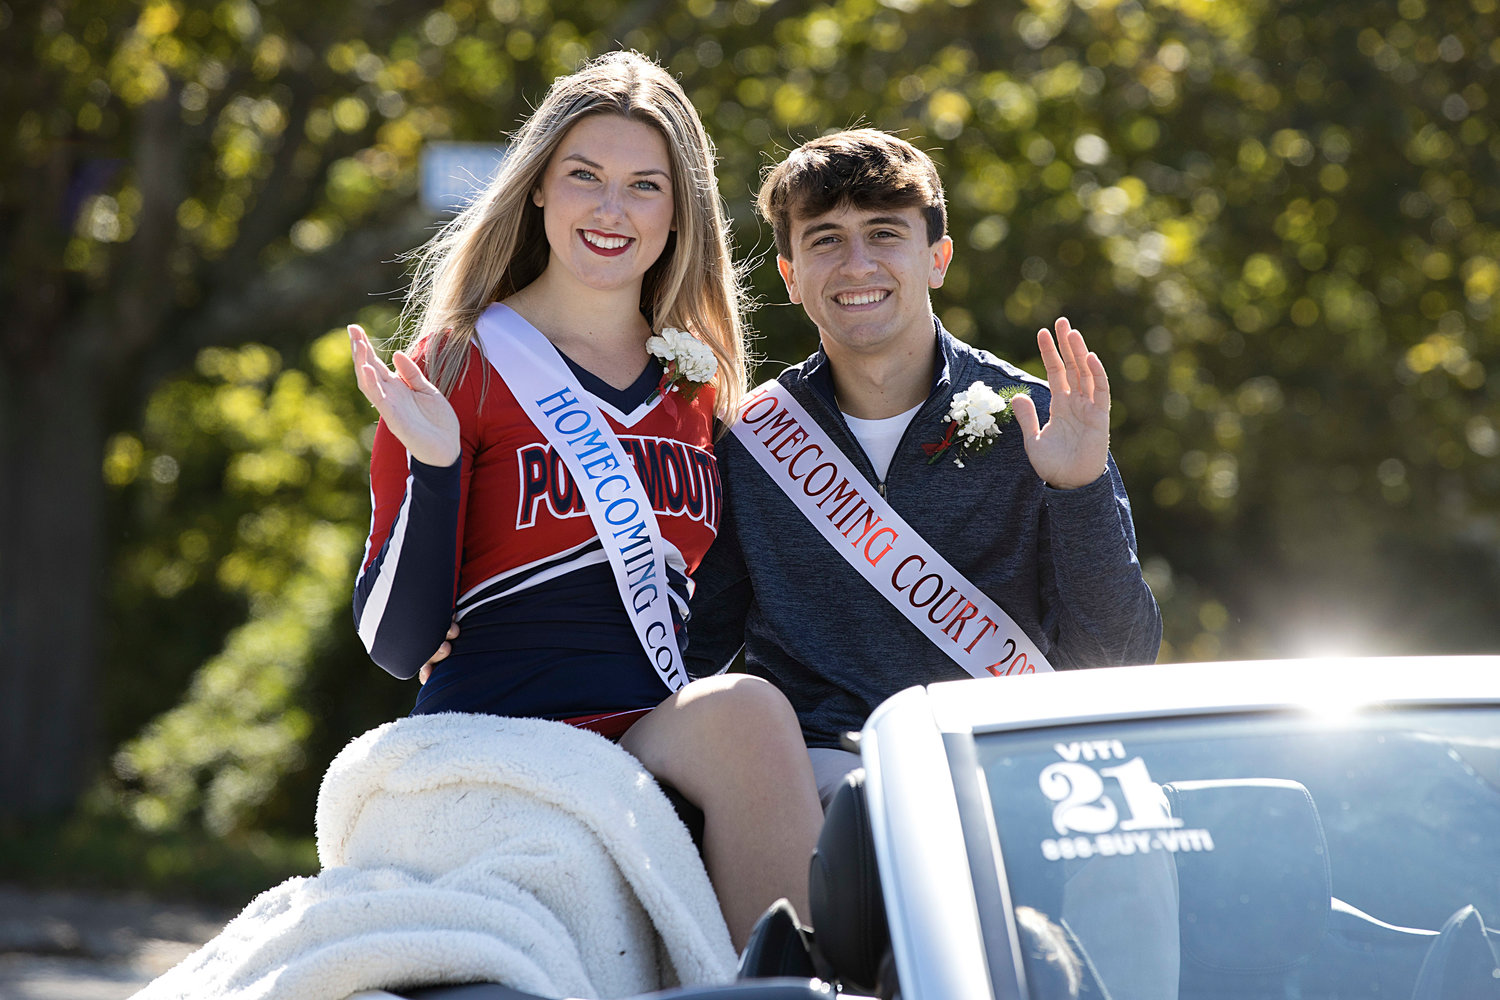 Phoebe Tavares and Andrew Alvanas of the Homecoming court wave from their car.